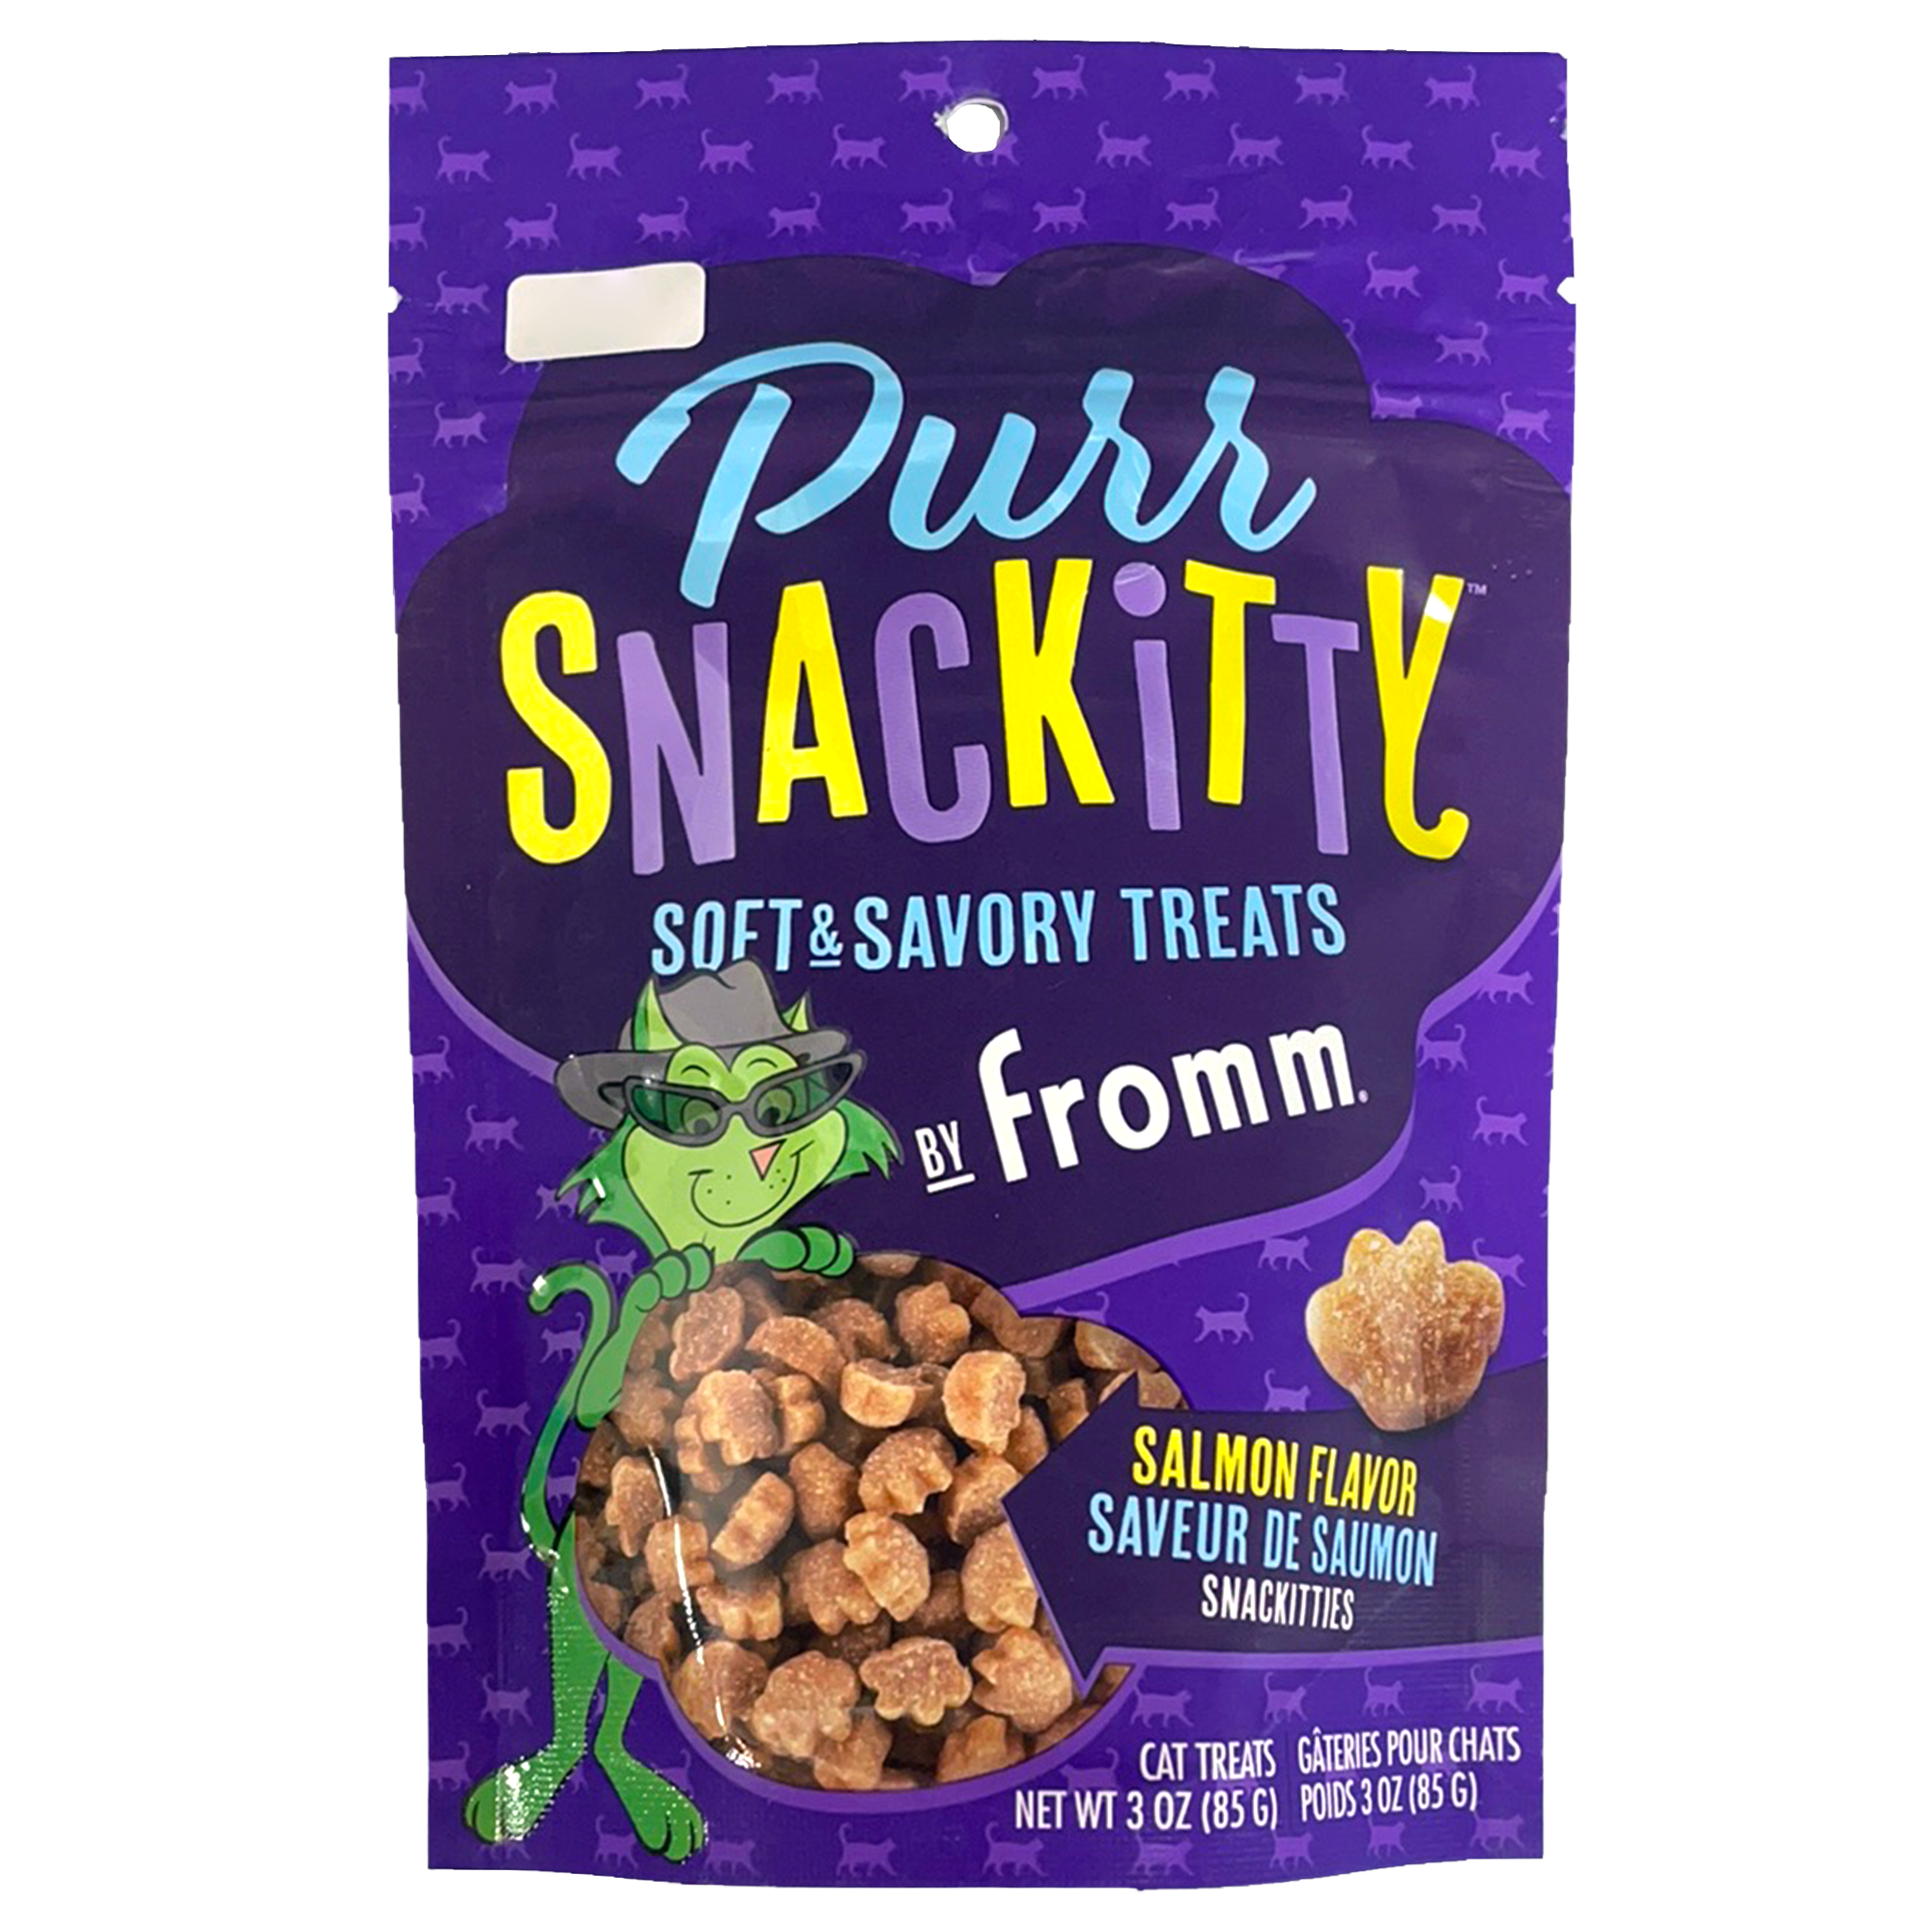 Fromm Purr Snackitty Soft & Savory Cat Treats, 85g